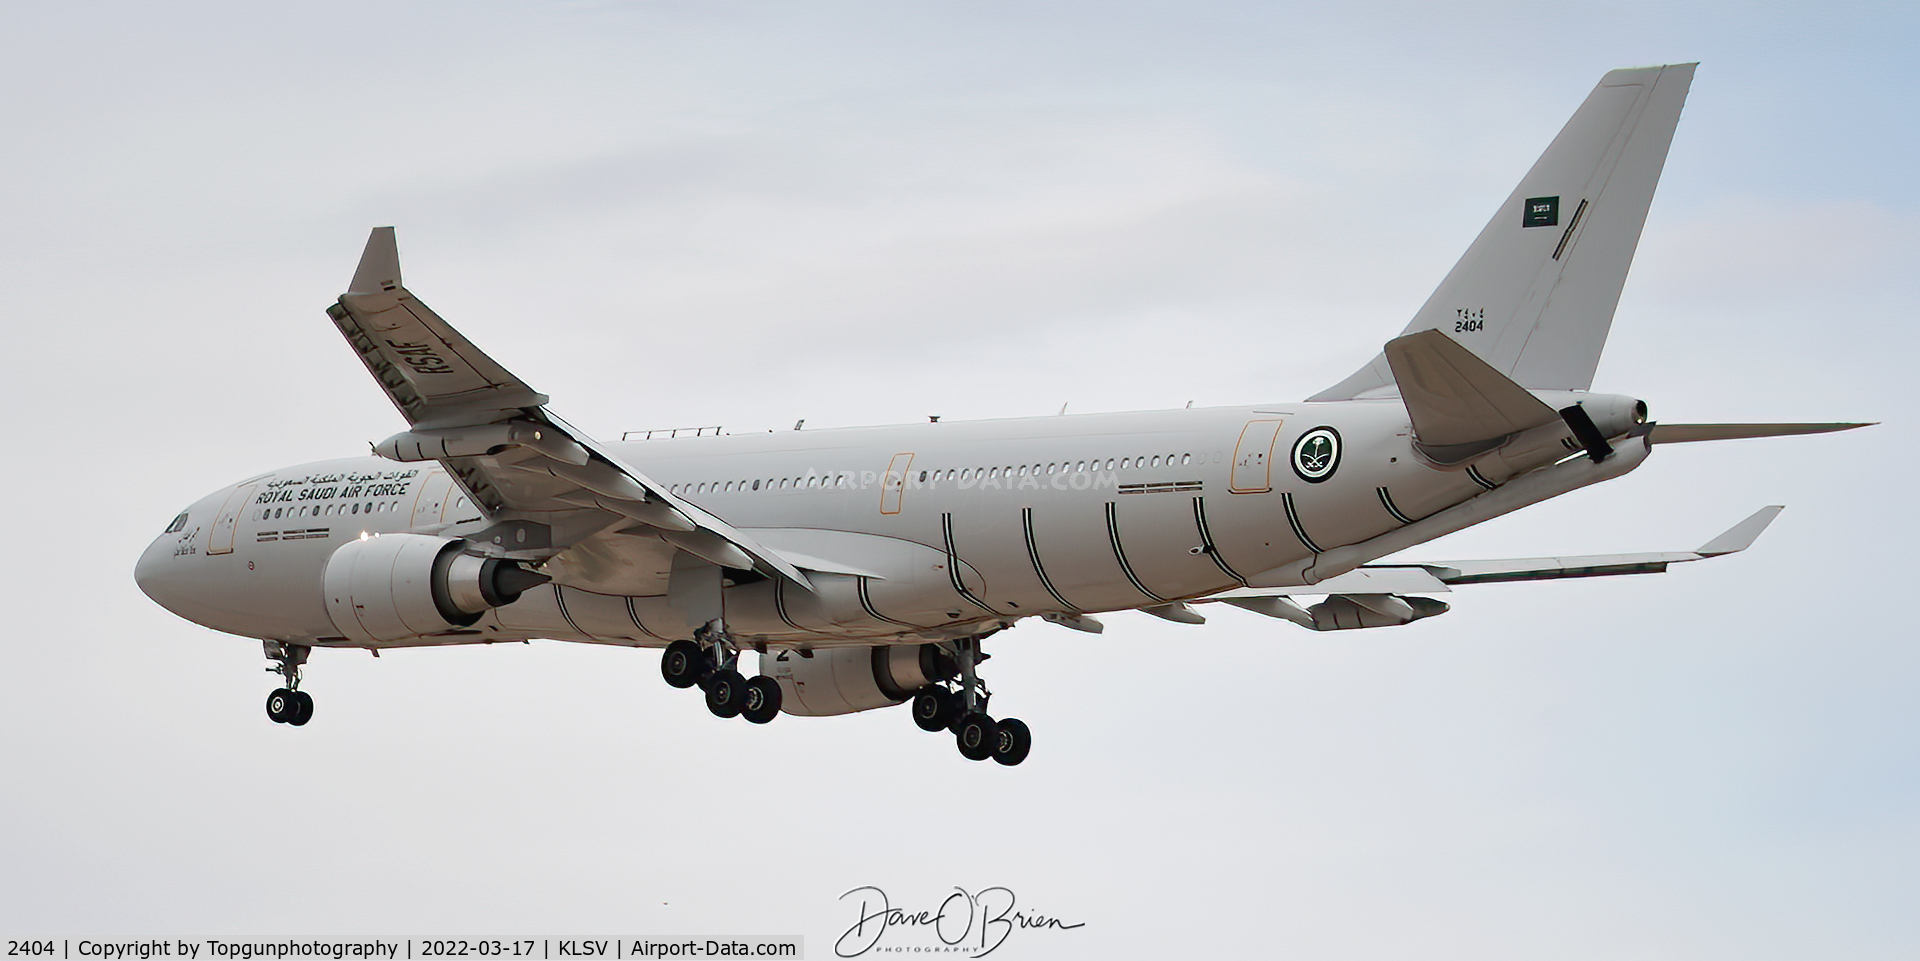 2404, 2013 Airbus A330-200MMRT C/N 1379, Royal Saudi tanker inbound to ferry F-15SA's back home after Red Flag 22-2